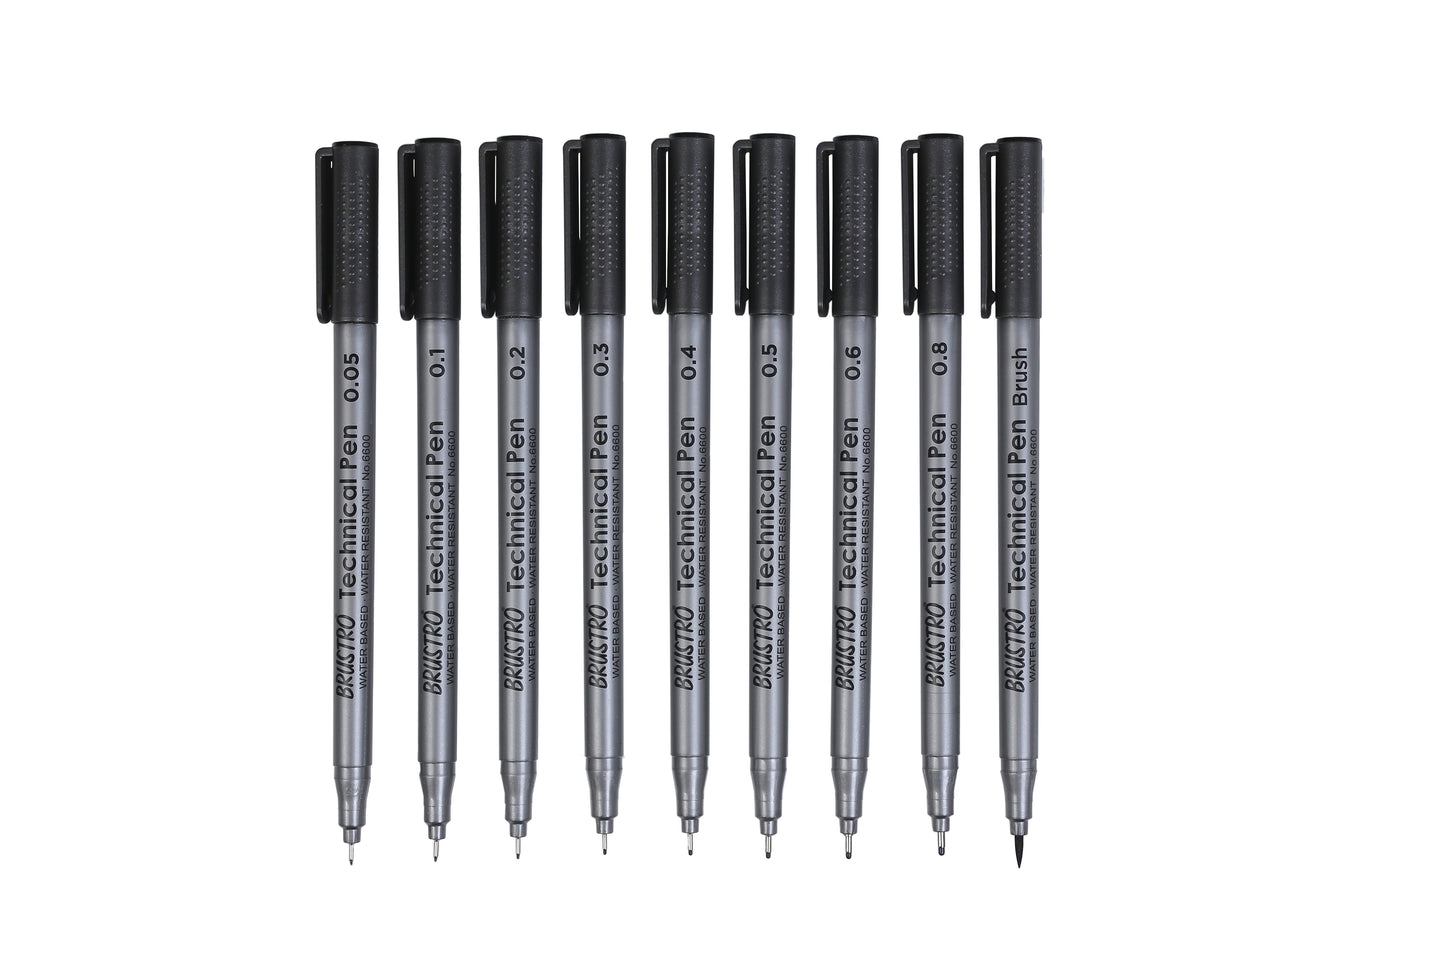 BRUSTRO Technical Pen (Set of 9) (Includes: 1 each of 0.05mm; 0.1mm; 0.2mm; 0.3mm; 0.4mm; 0.5mm; 0.6mm; 0.8mm & Brush.)